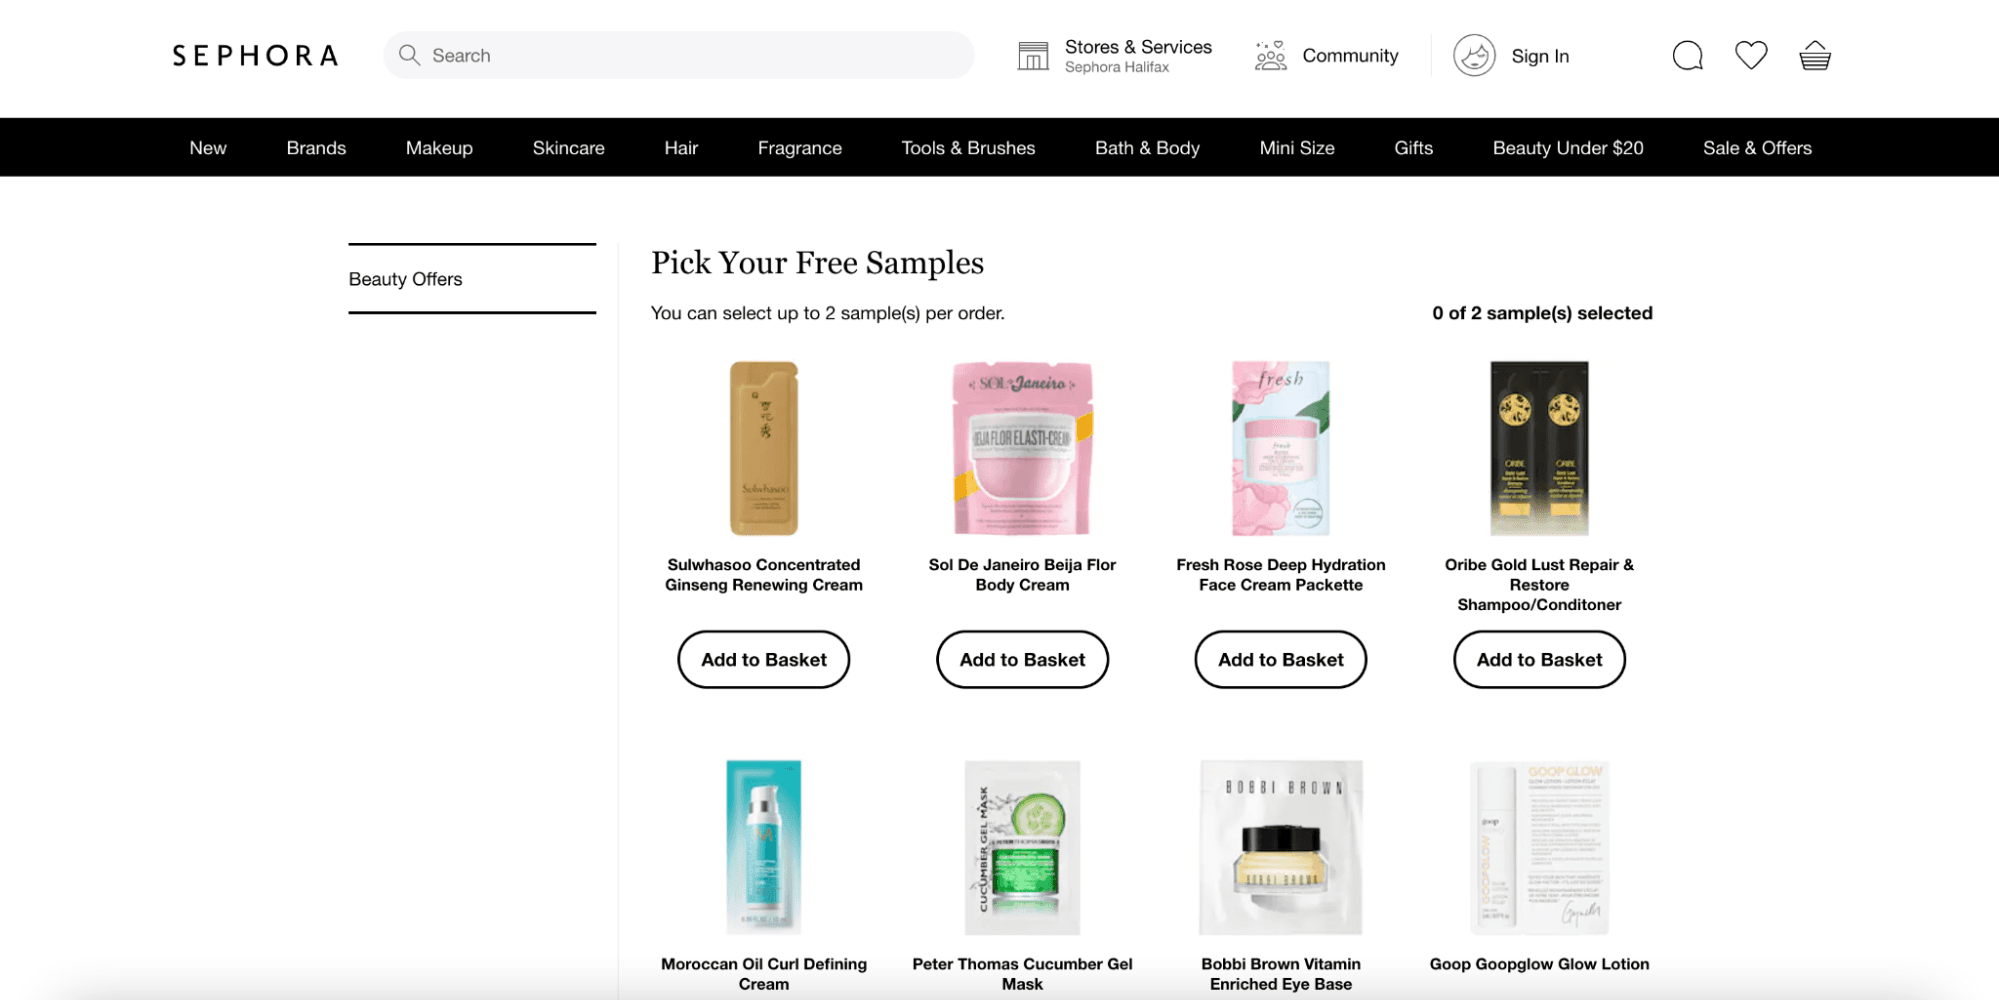 A screenshot of the Sephora website, displaying free samples customers can pick from when they order.